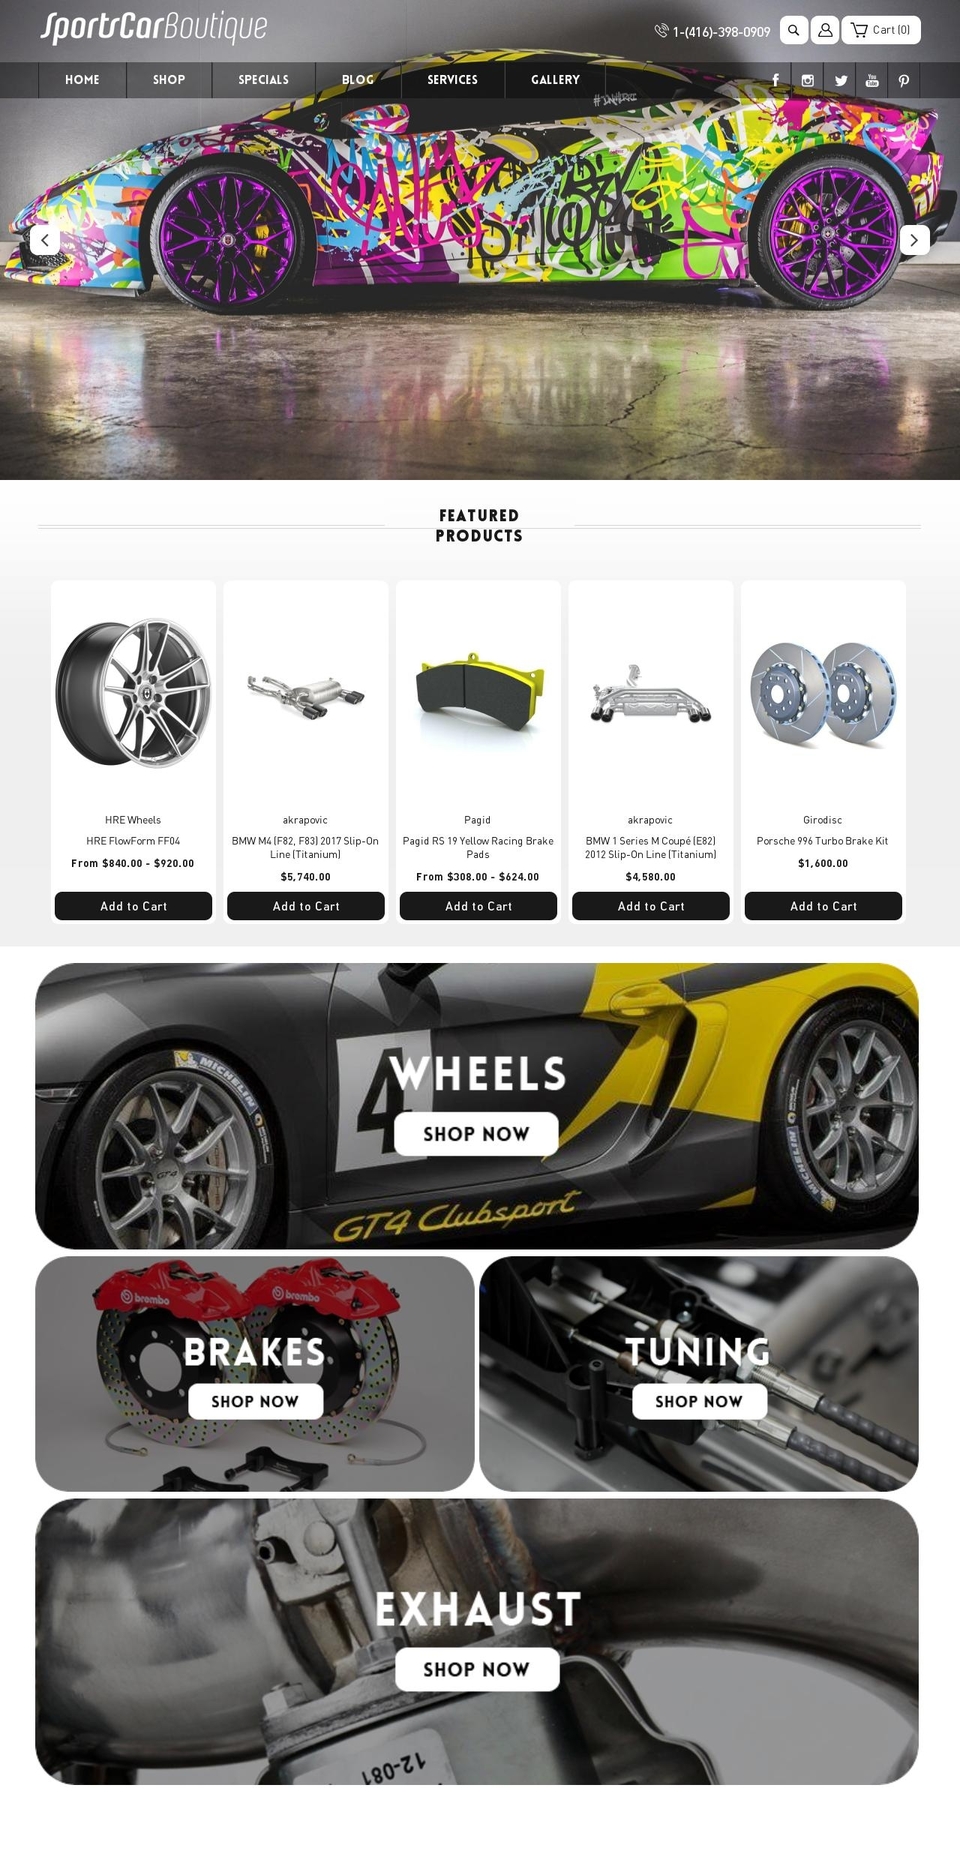 qeretail Shopify theme site example sportscarboutique.ca